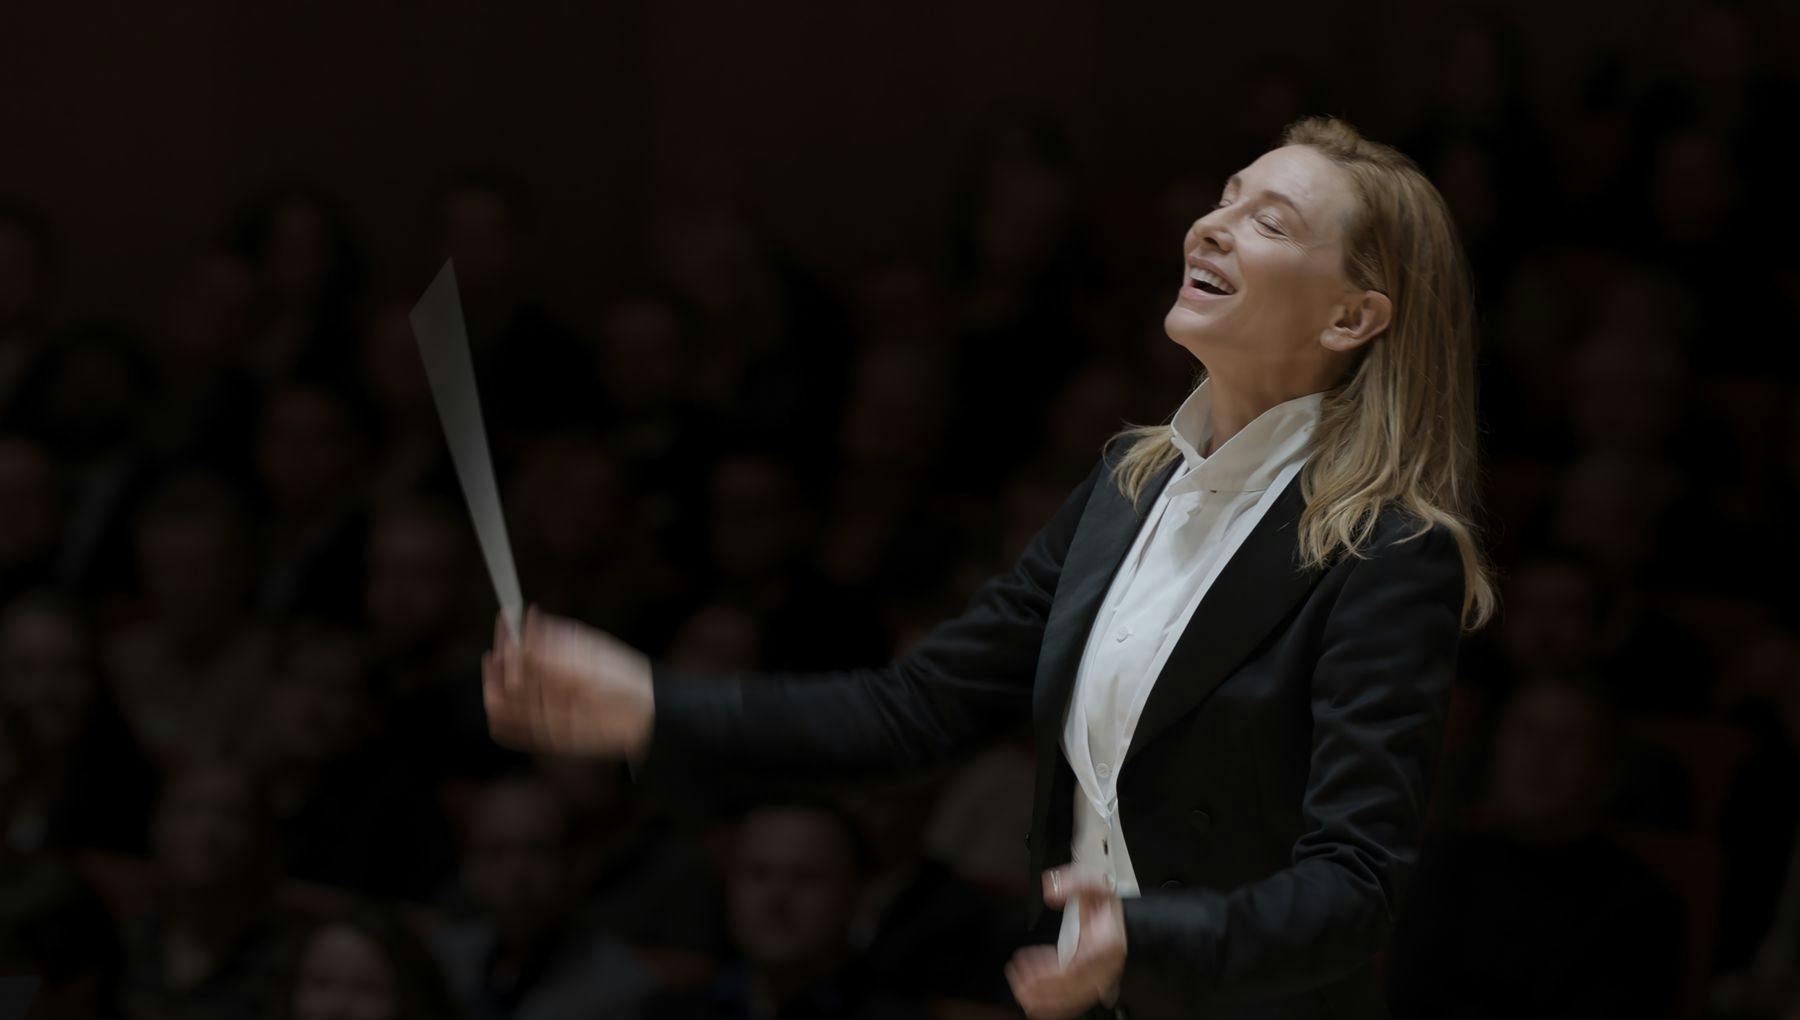 Todd Field’s TÁR will have its world premiere at the Venice International Film Festival.

Cate Blanchett stars as Lydia Tár in director Todd Field's TÁR, a Focus Features release. Credit: Florian Hoffmeister / Focus Features